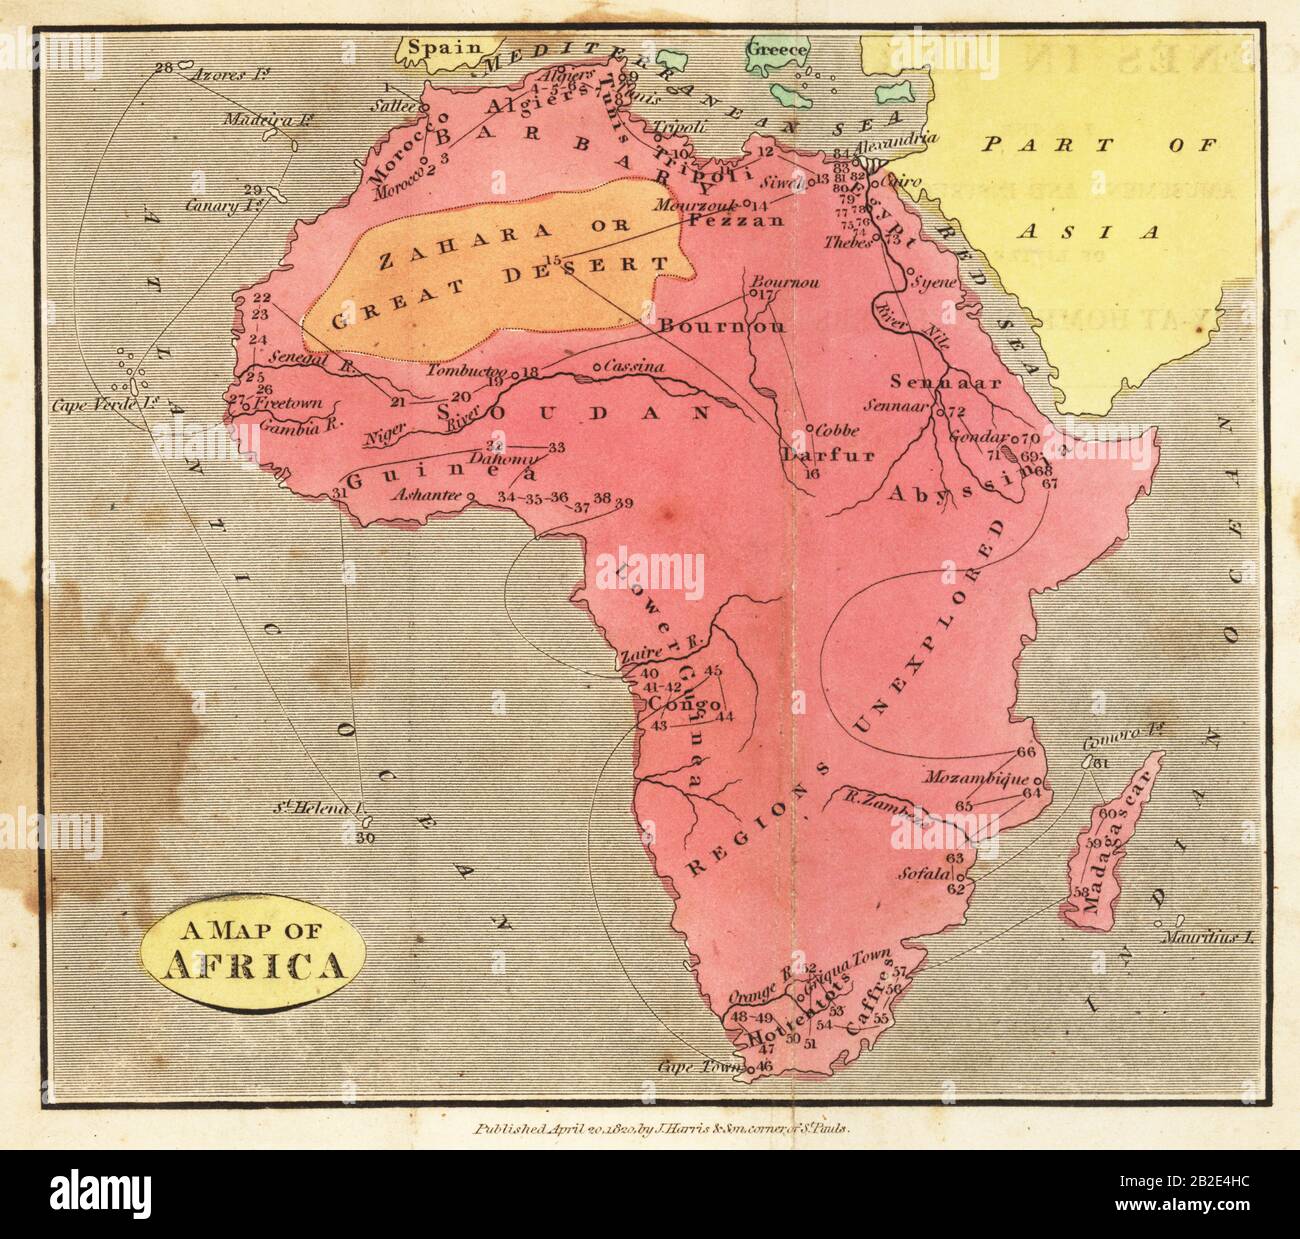 Map of Africa, 1820. Showing Morocco, Barbary and the Sahara in the north, Soudan and Guinea in the west, Khoikhoi (Hottentots) and Bantu (Caffres) in the south, and Abyssinia and Sennaar in the east. Stock Photo